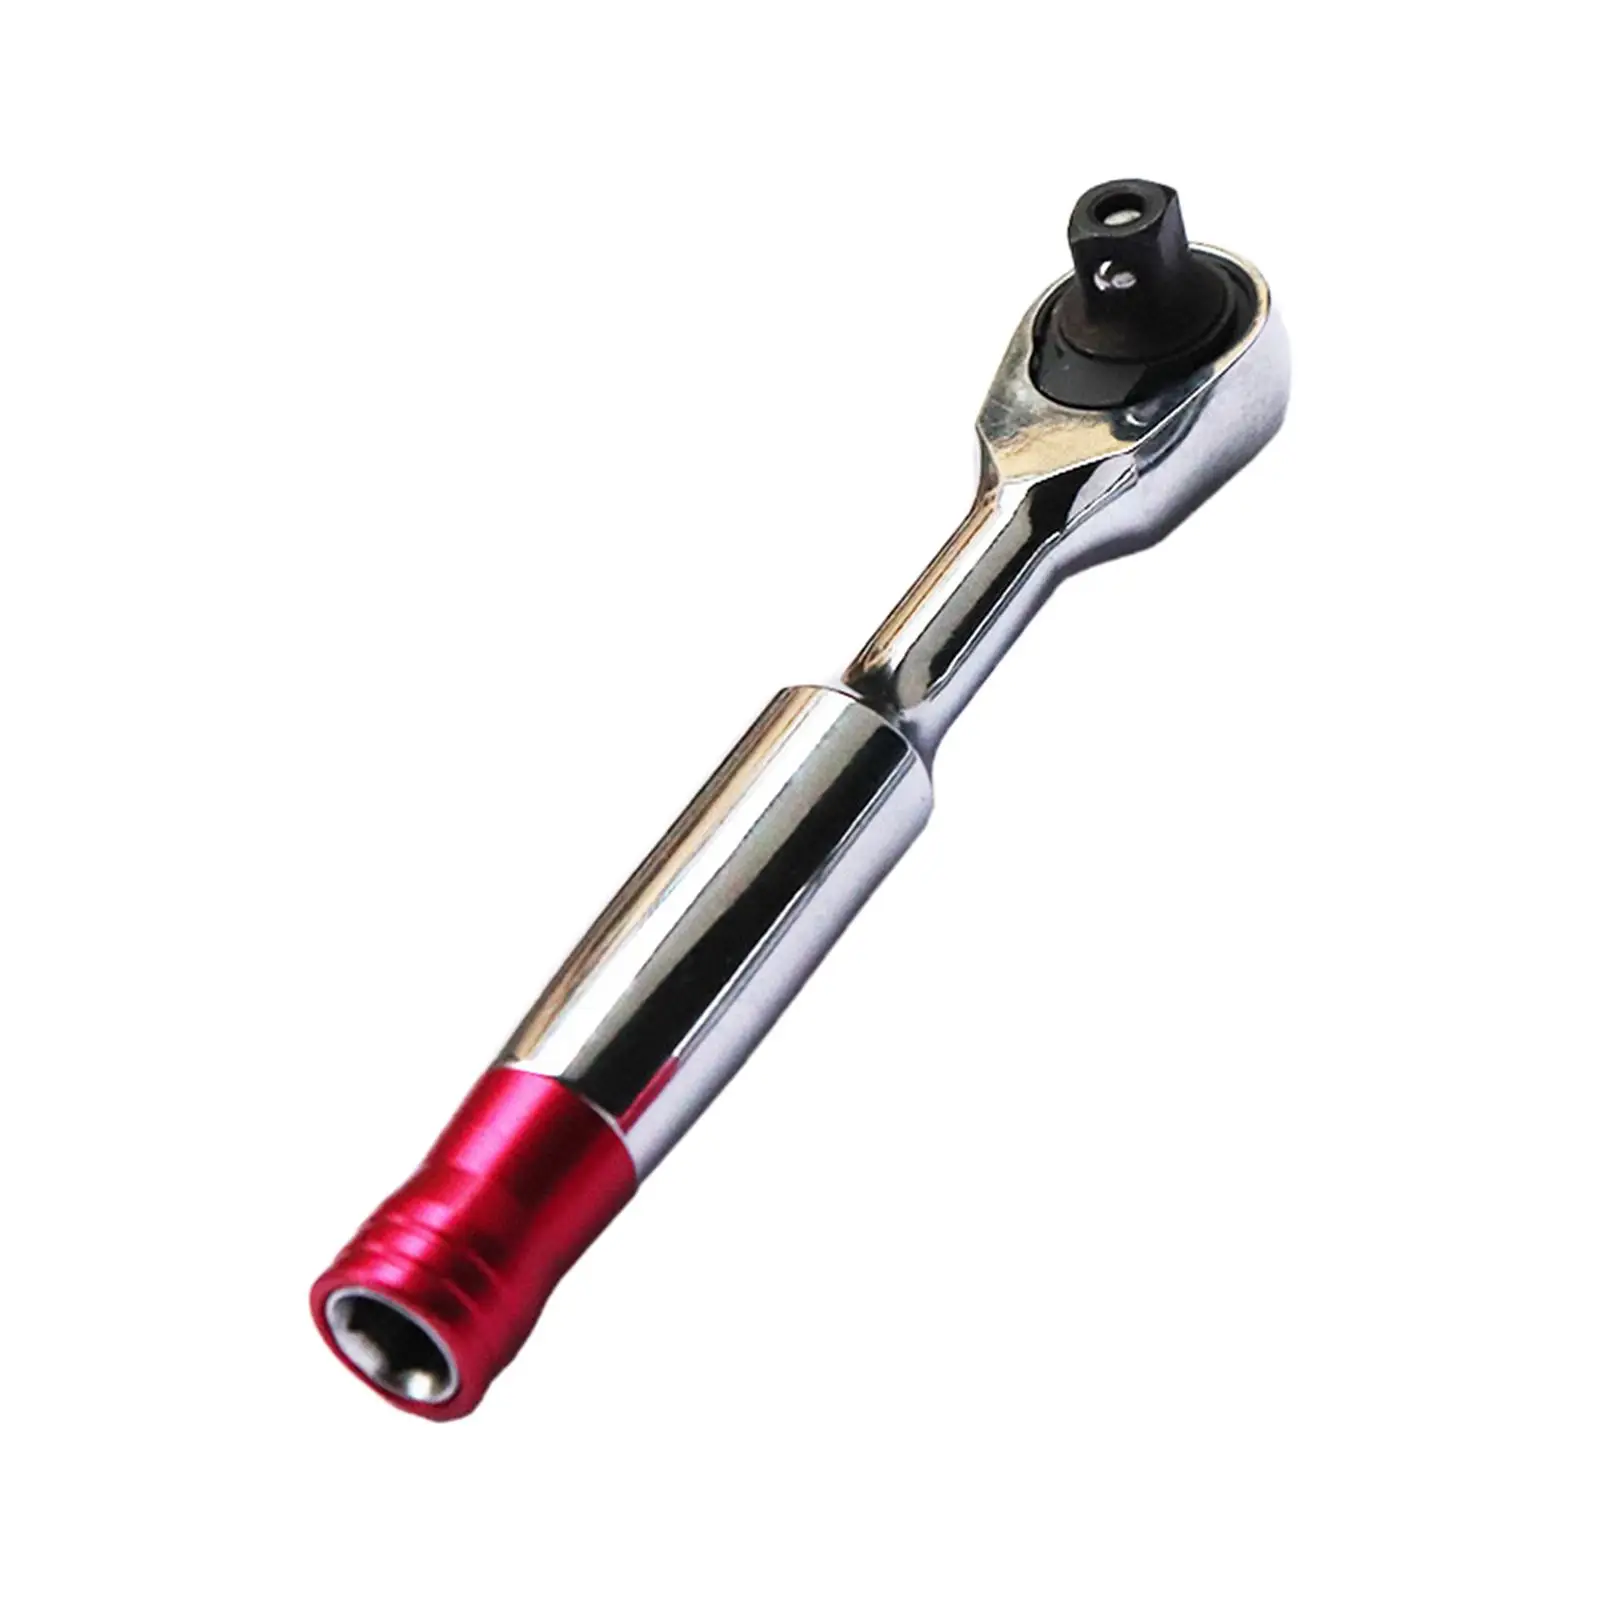 1/4 inch Mini Ratchet Sockets Wrench for Narrow Space Lightweight 85mm Sockets